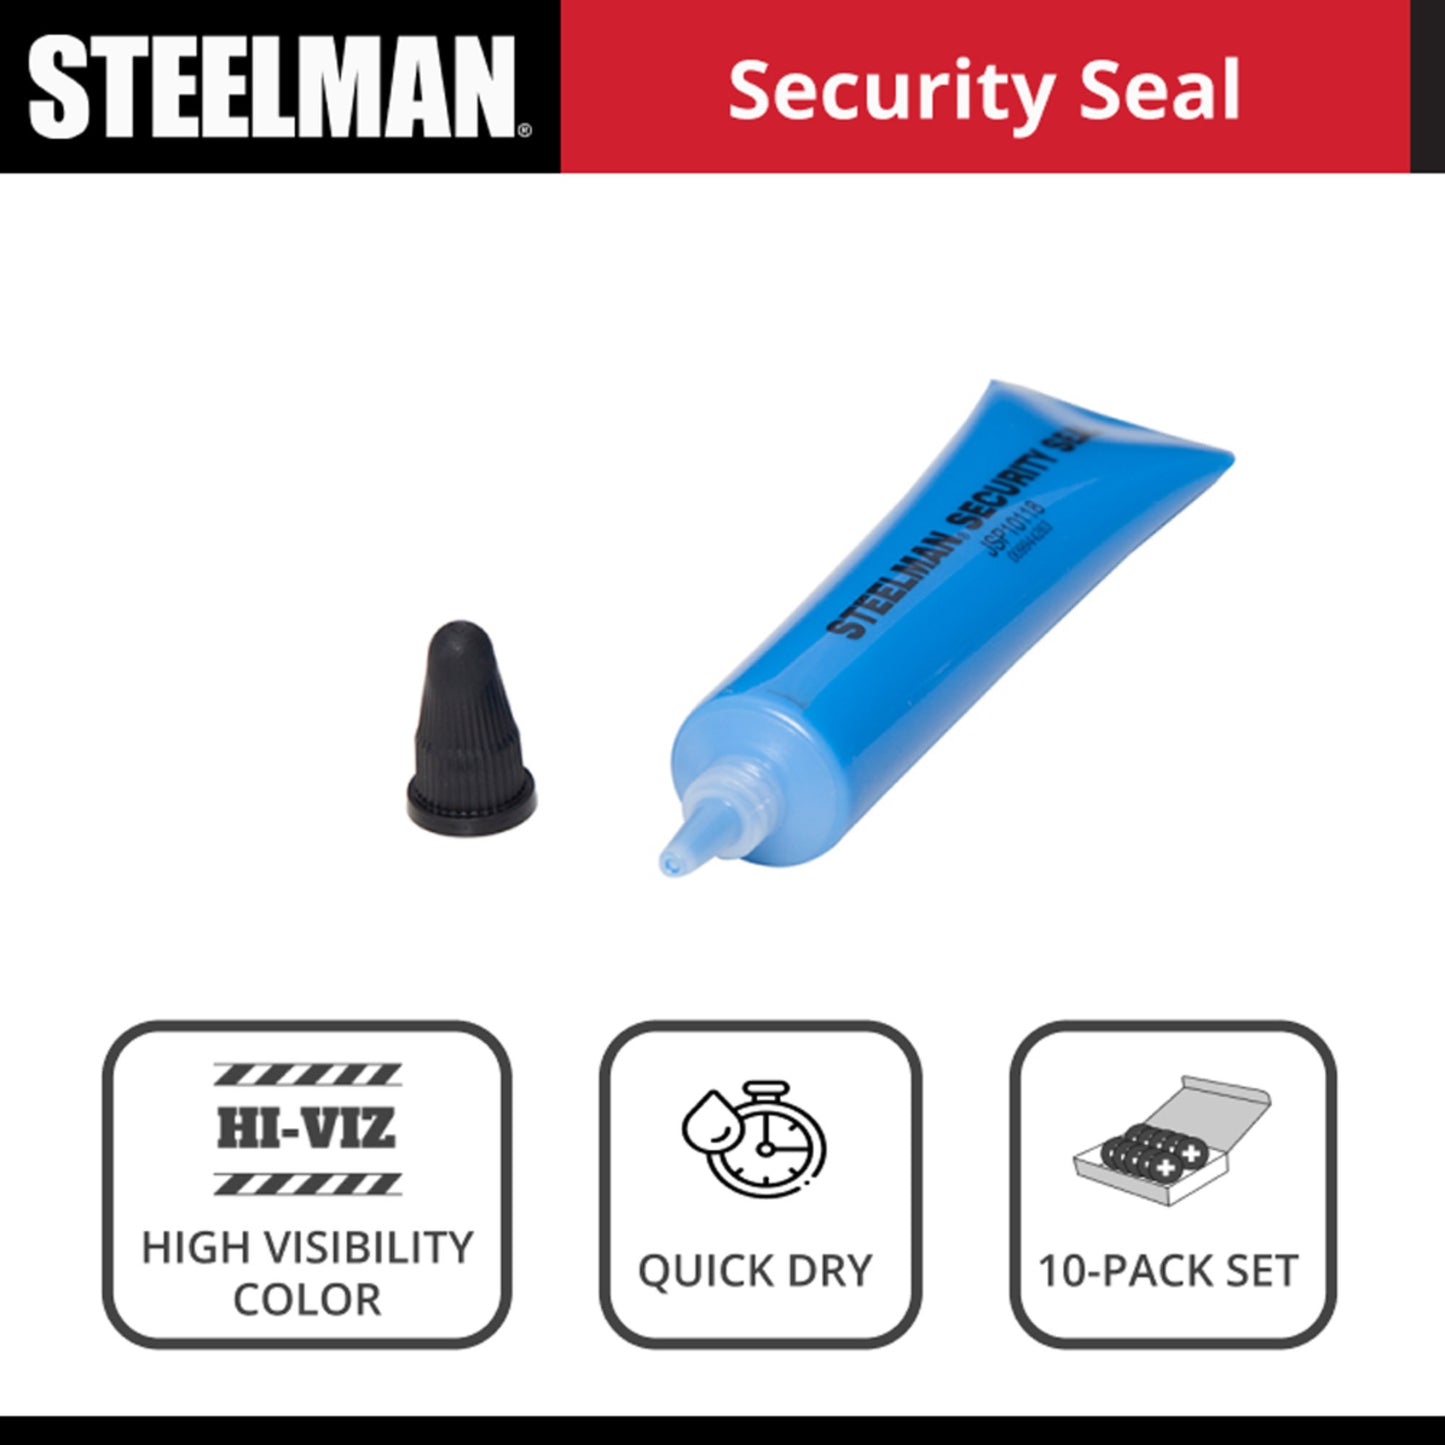 1-Ounce Security Seal, Pack of 10 (4-Pack)